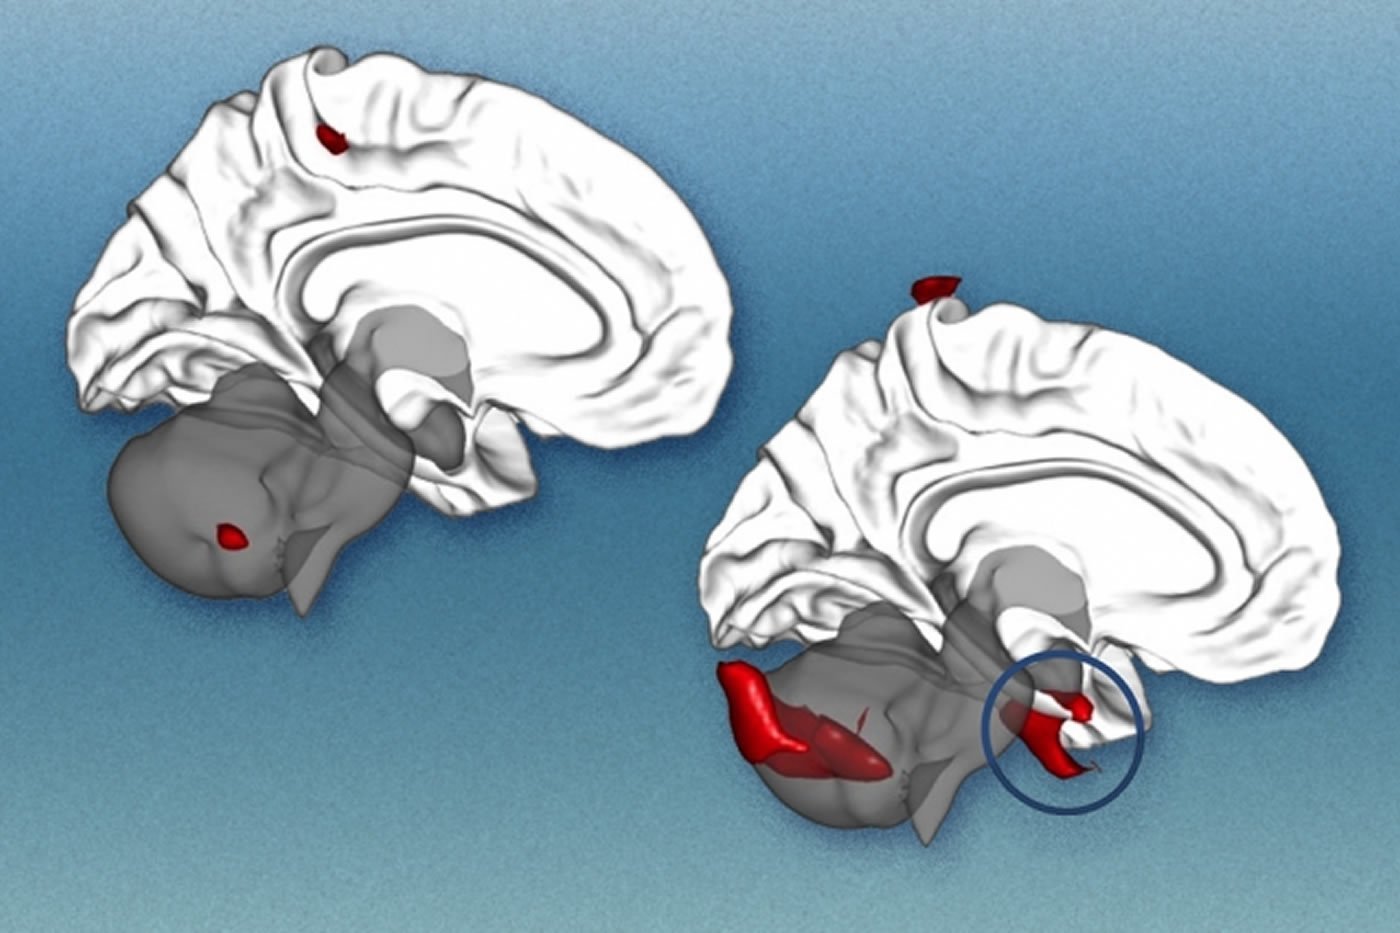 This image shows two brains.